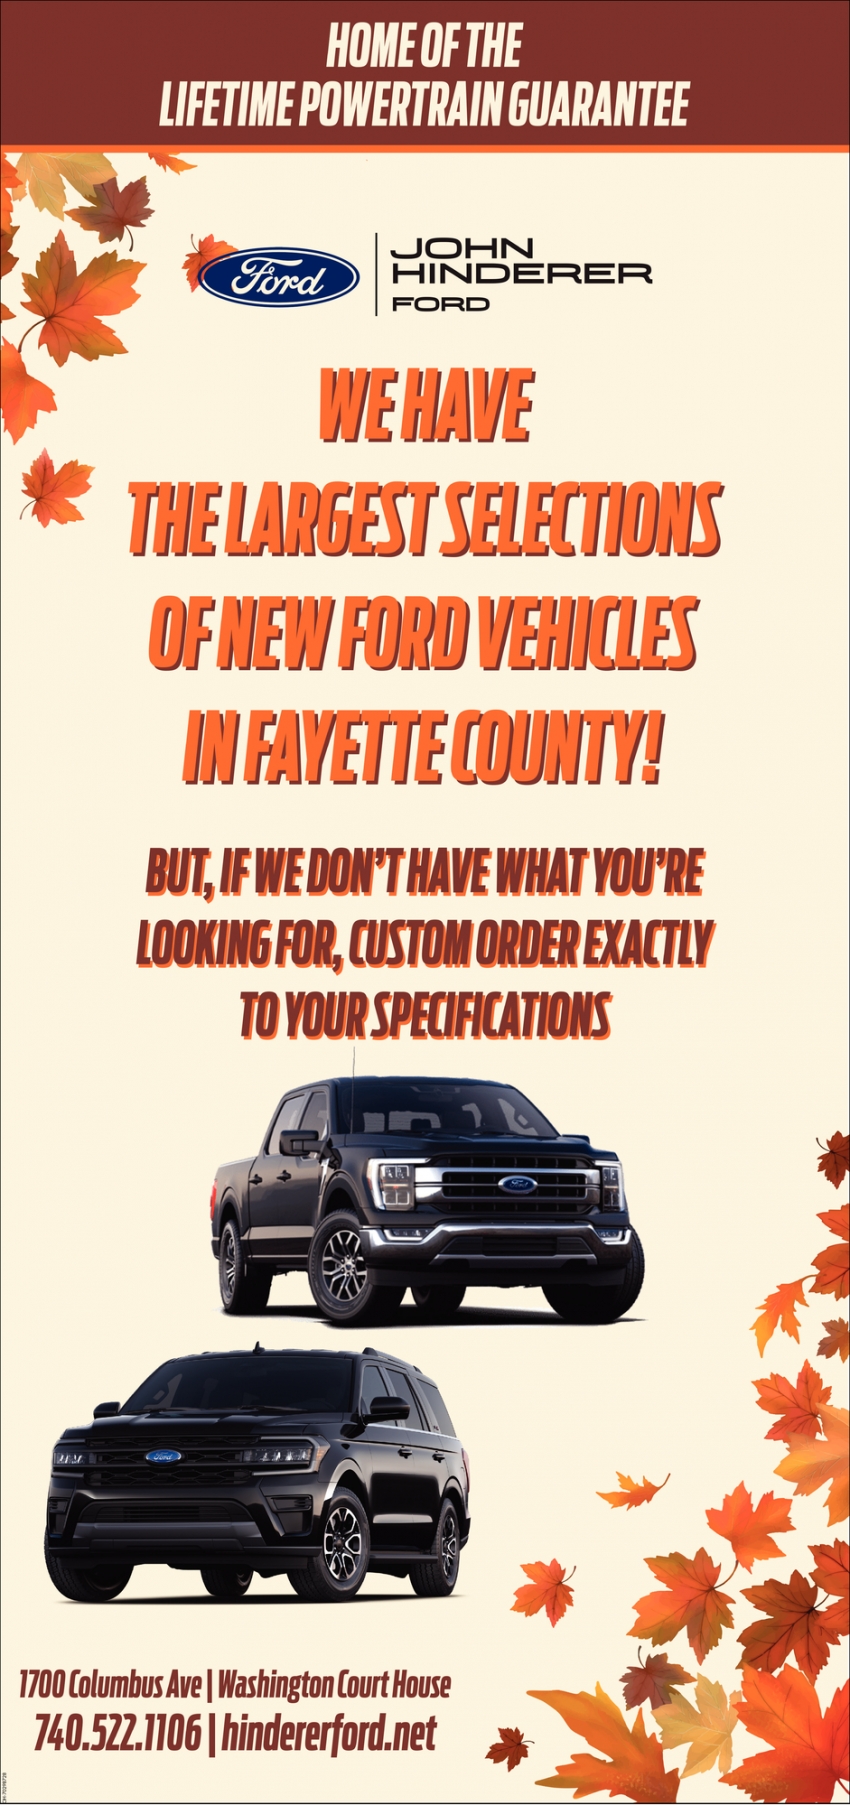 Largest Selection Of Fords In Fayette County